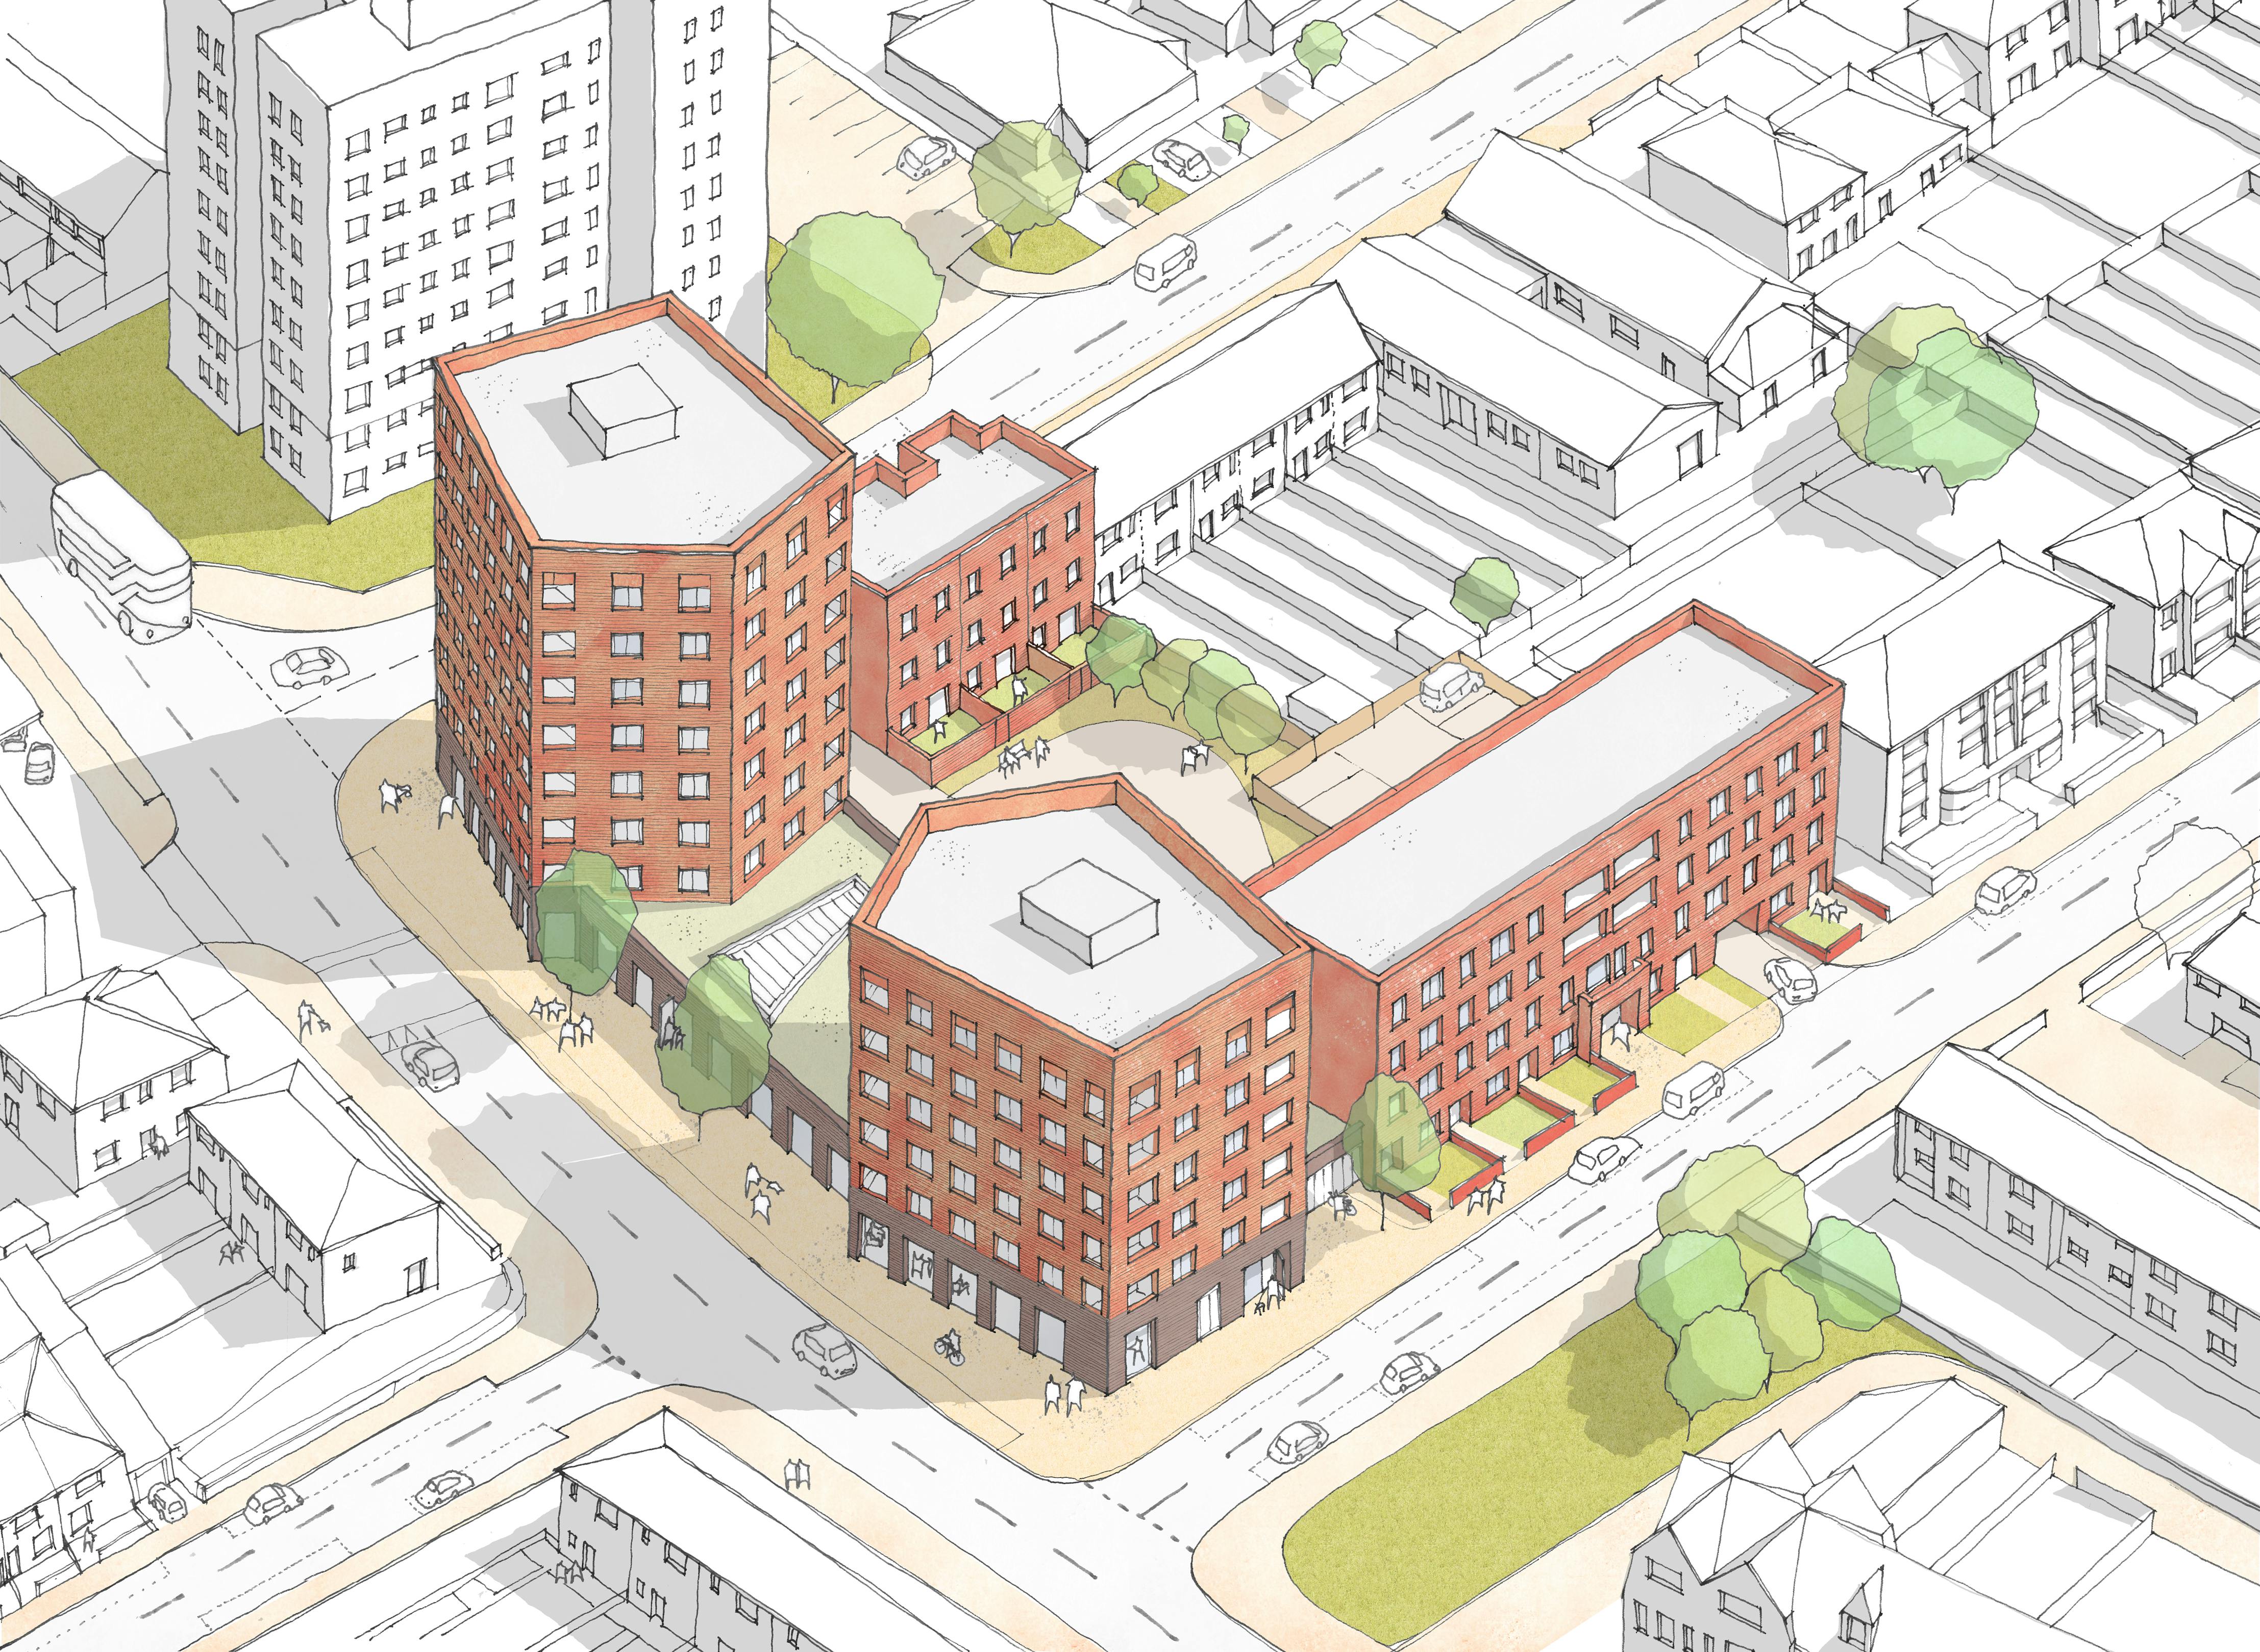 Aerial view of the proposed new development